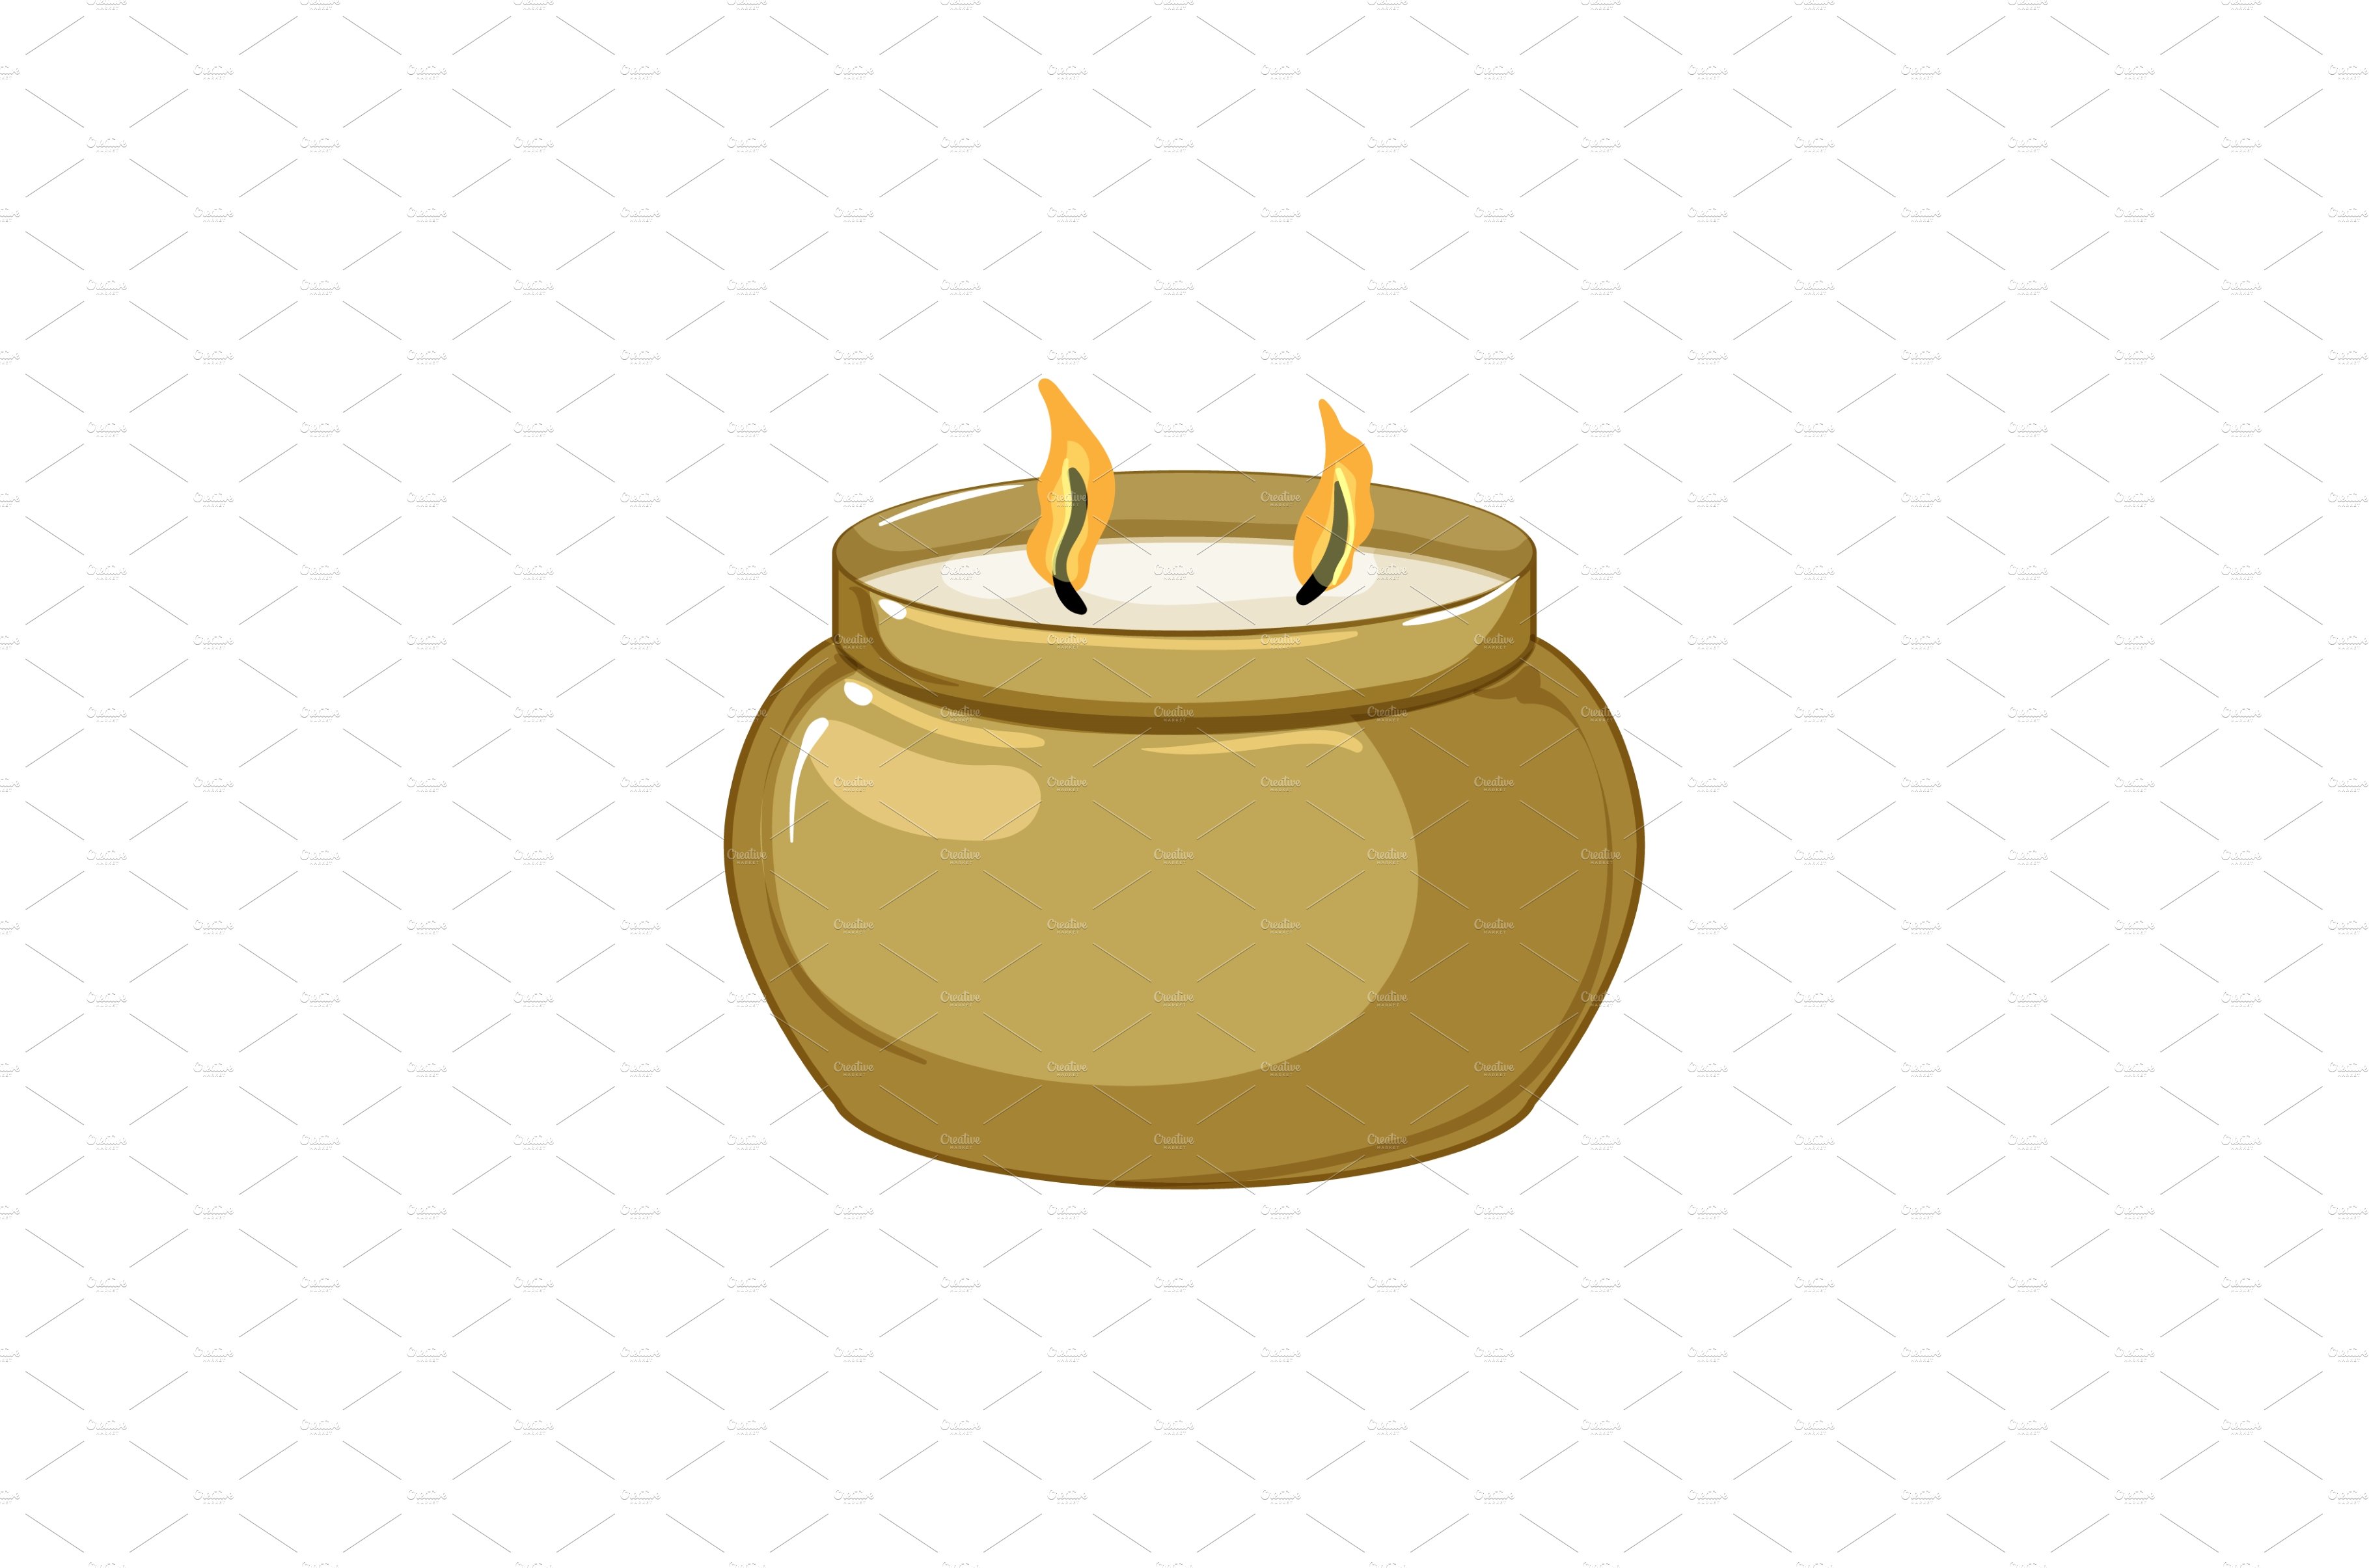 wax scented candle cartoon vector cover image.